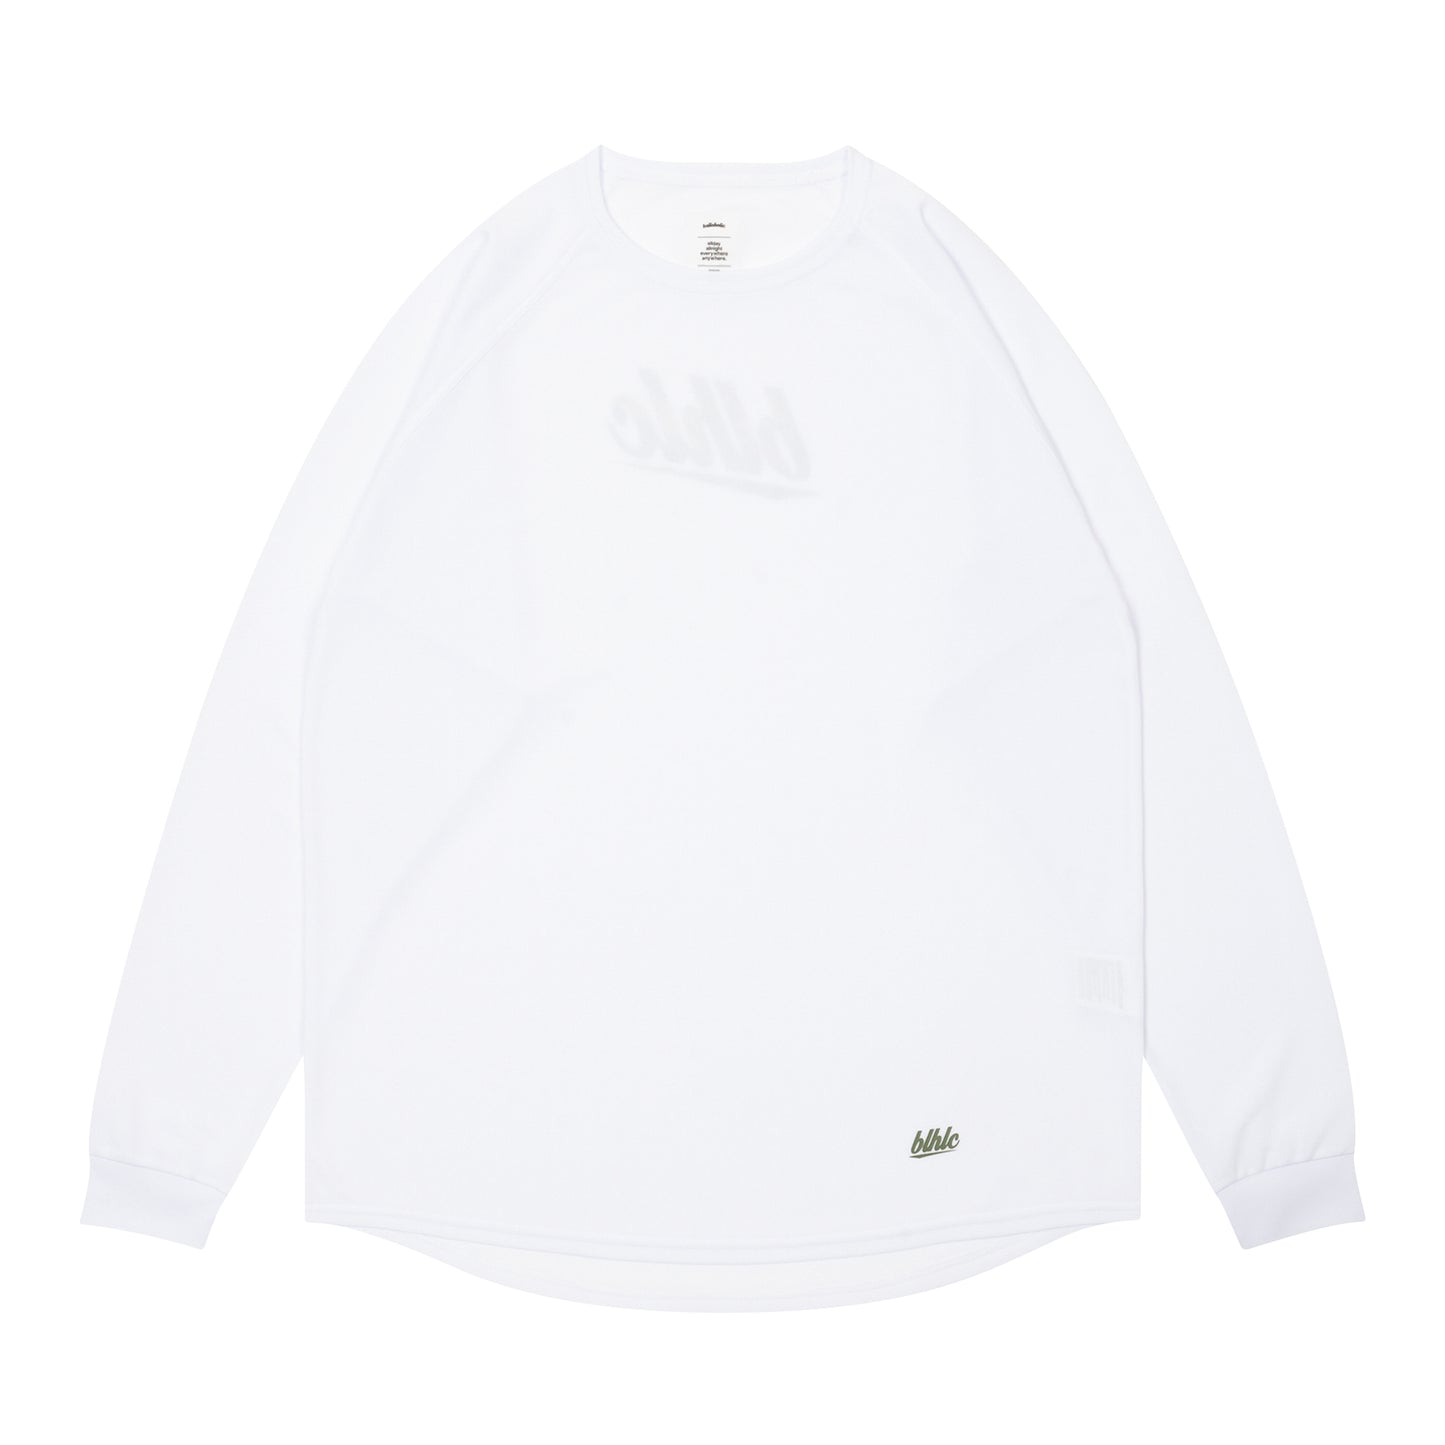 blhlc Back Print Cool Long Tee (white/north)